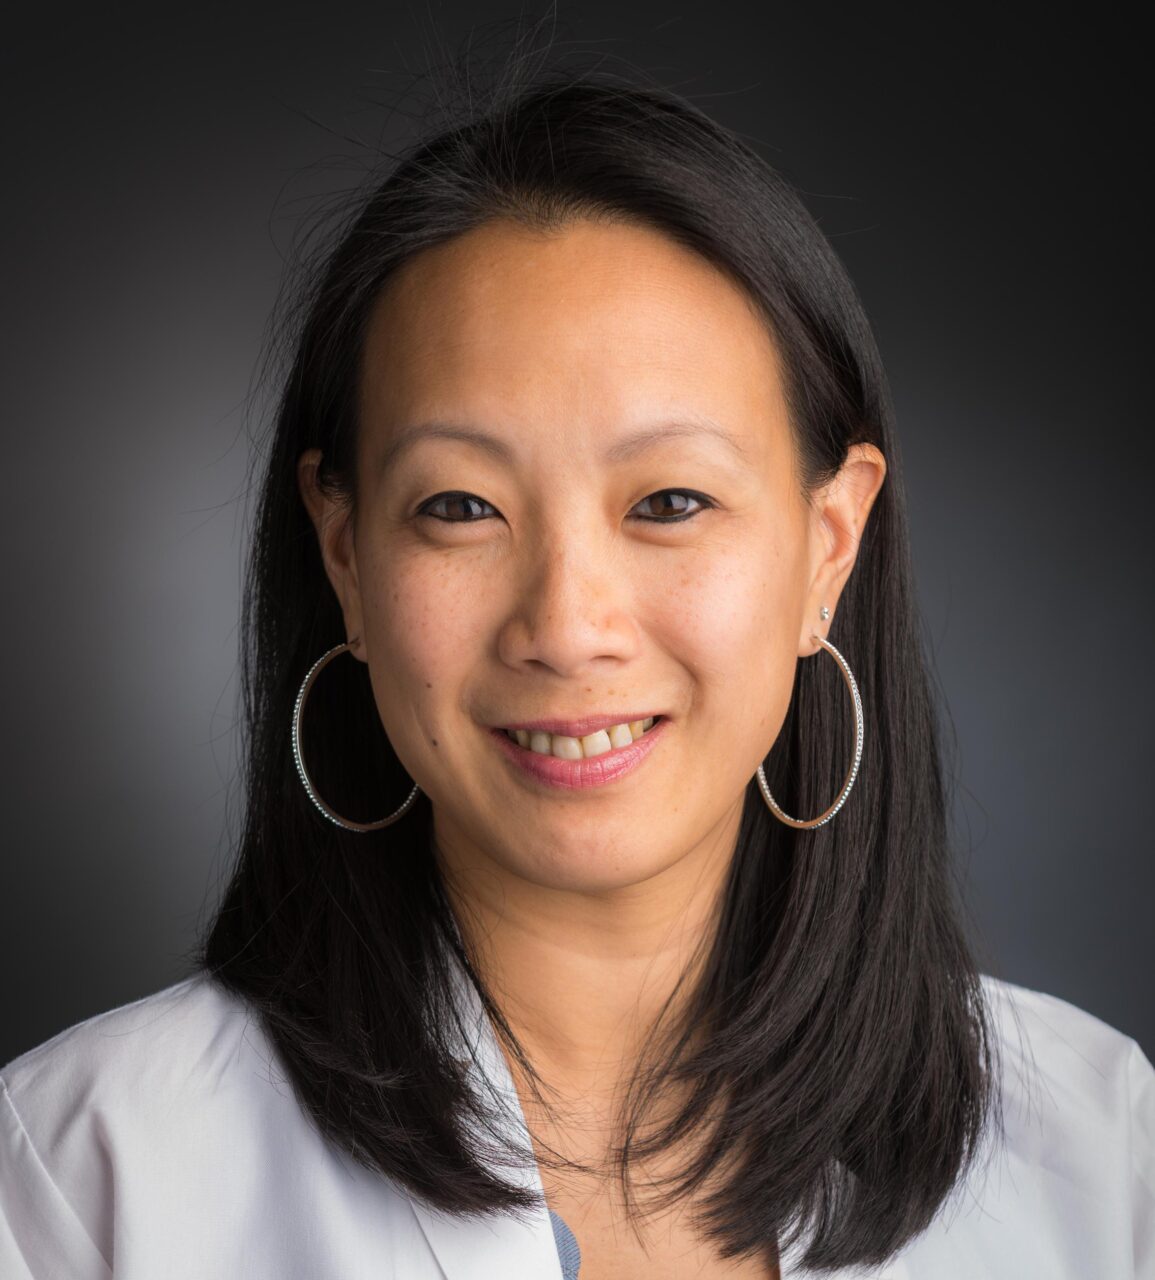 Kimmie Ng: So excited to serve as Associate Editor at JAMA